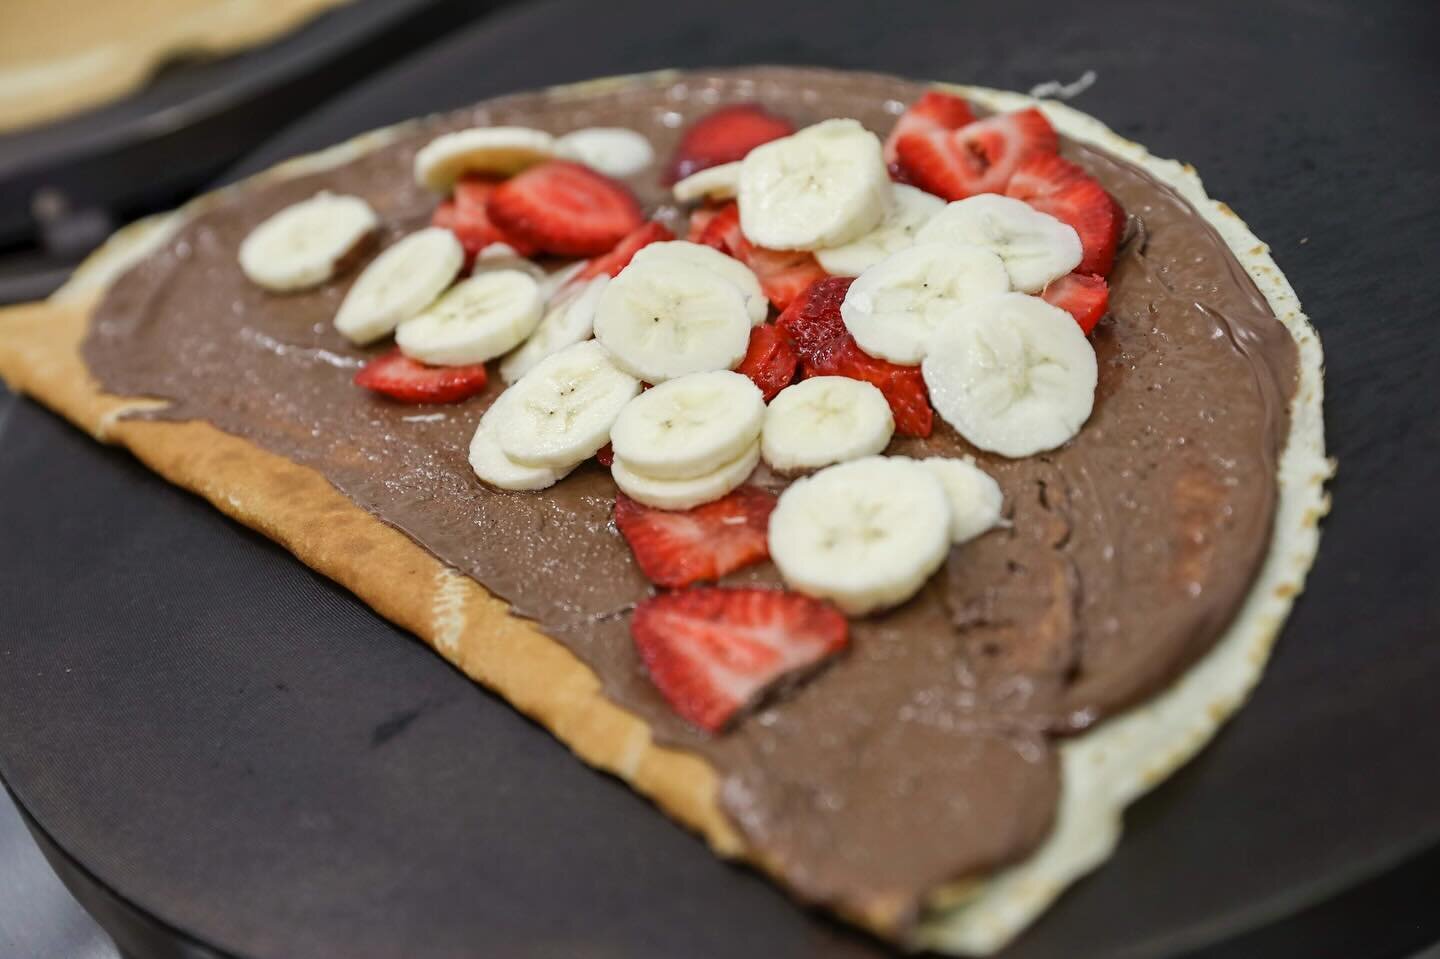 As sweet as it gets&hellip;banana &amp; strawberries on delicious Nutella!